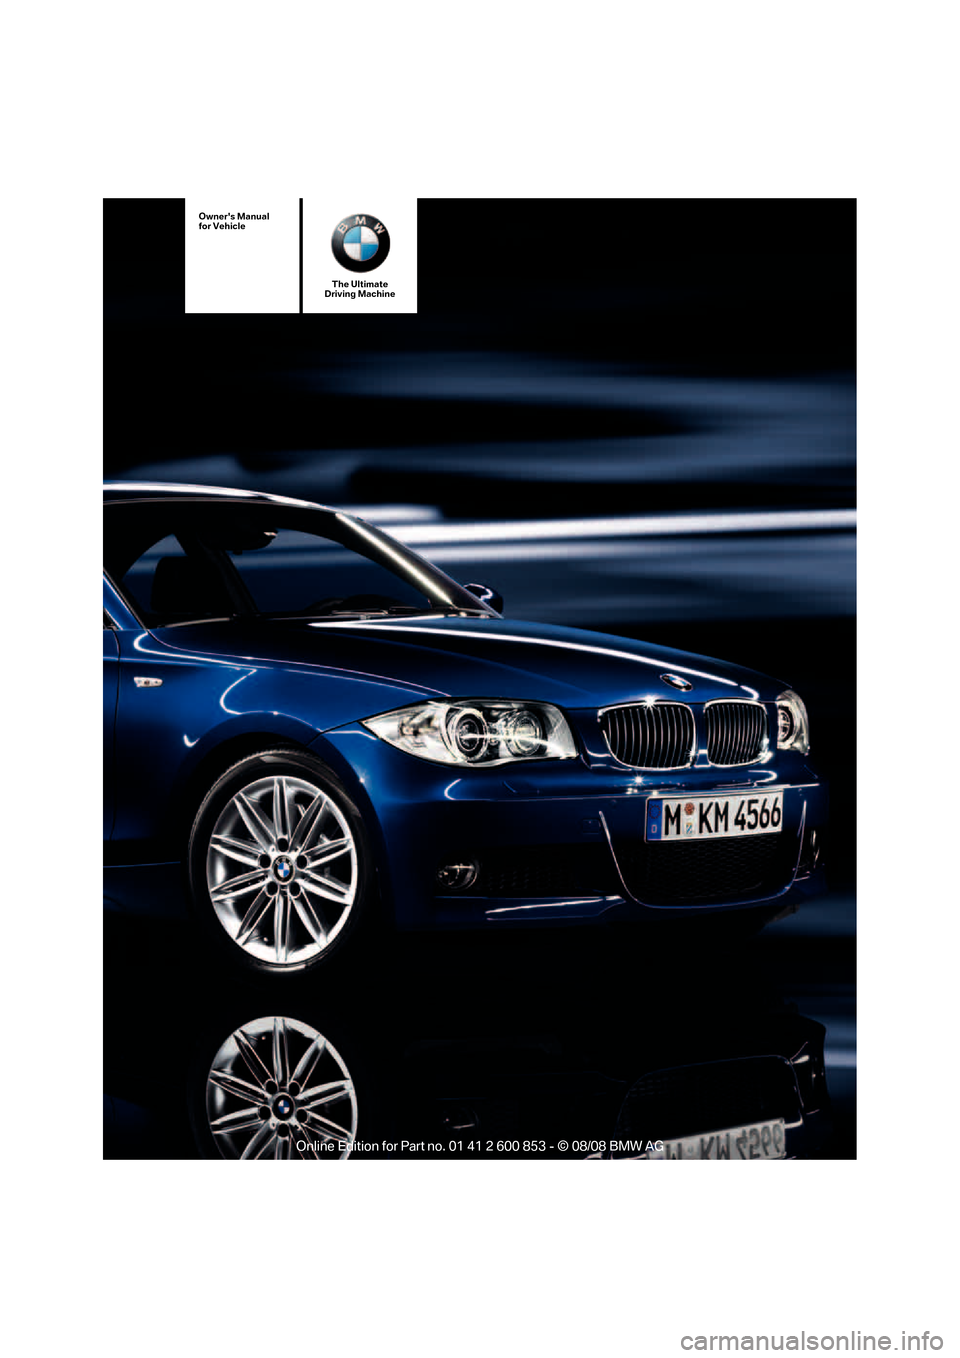 BMW 135I 2009 E88 Owners Manual The Ultimate
Driving Machine
Owners Manual
for Vehicle 